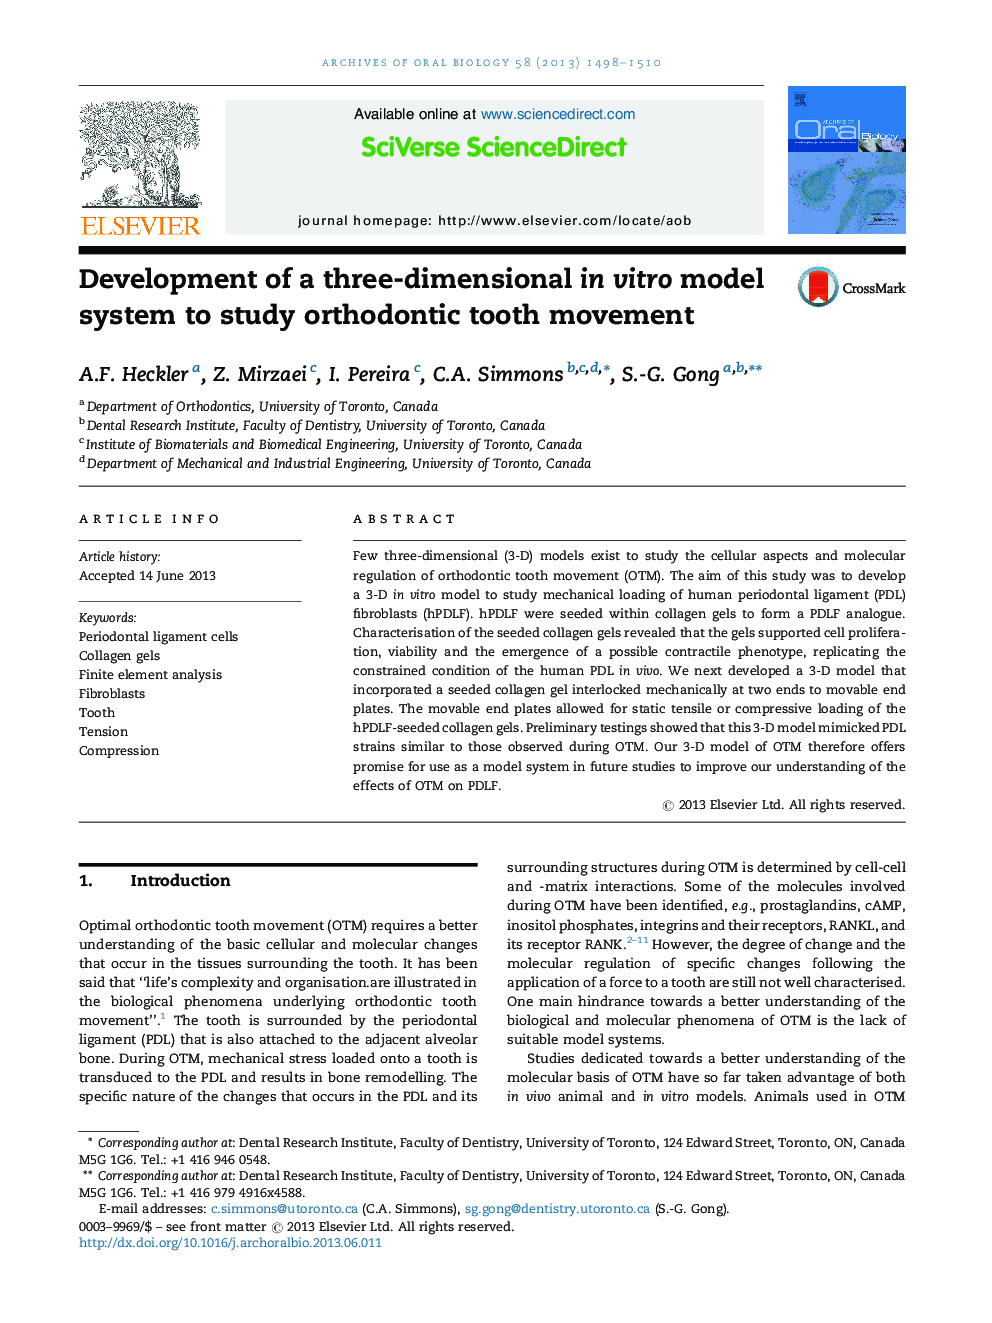 Development of a three-dimensional in vitro model system to study orthodontic tooth movement